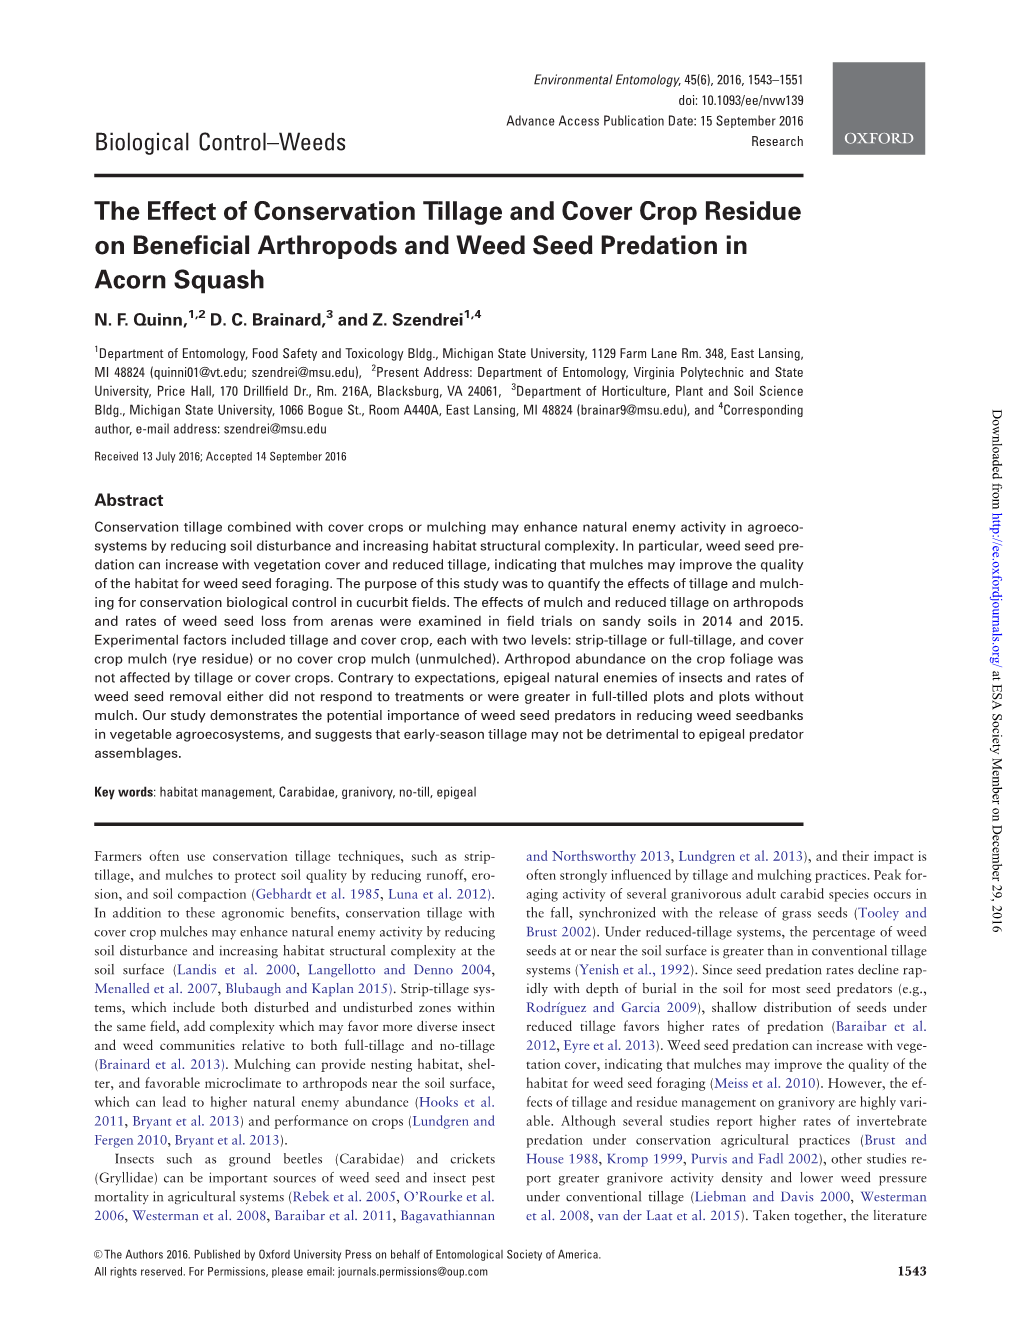 The Effect of Conservation Tillage and Cover Crop Residue on Beneficial Arthropods and Weed Seed Predation in Acorn Squash